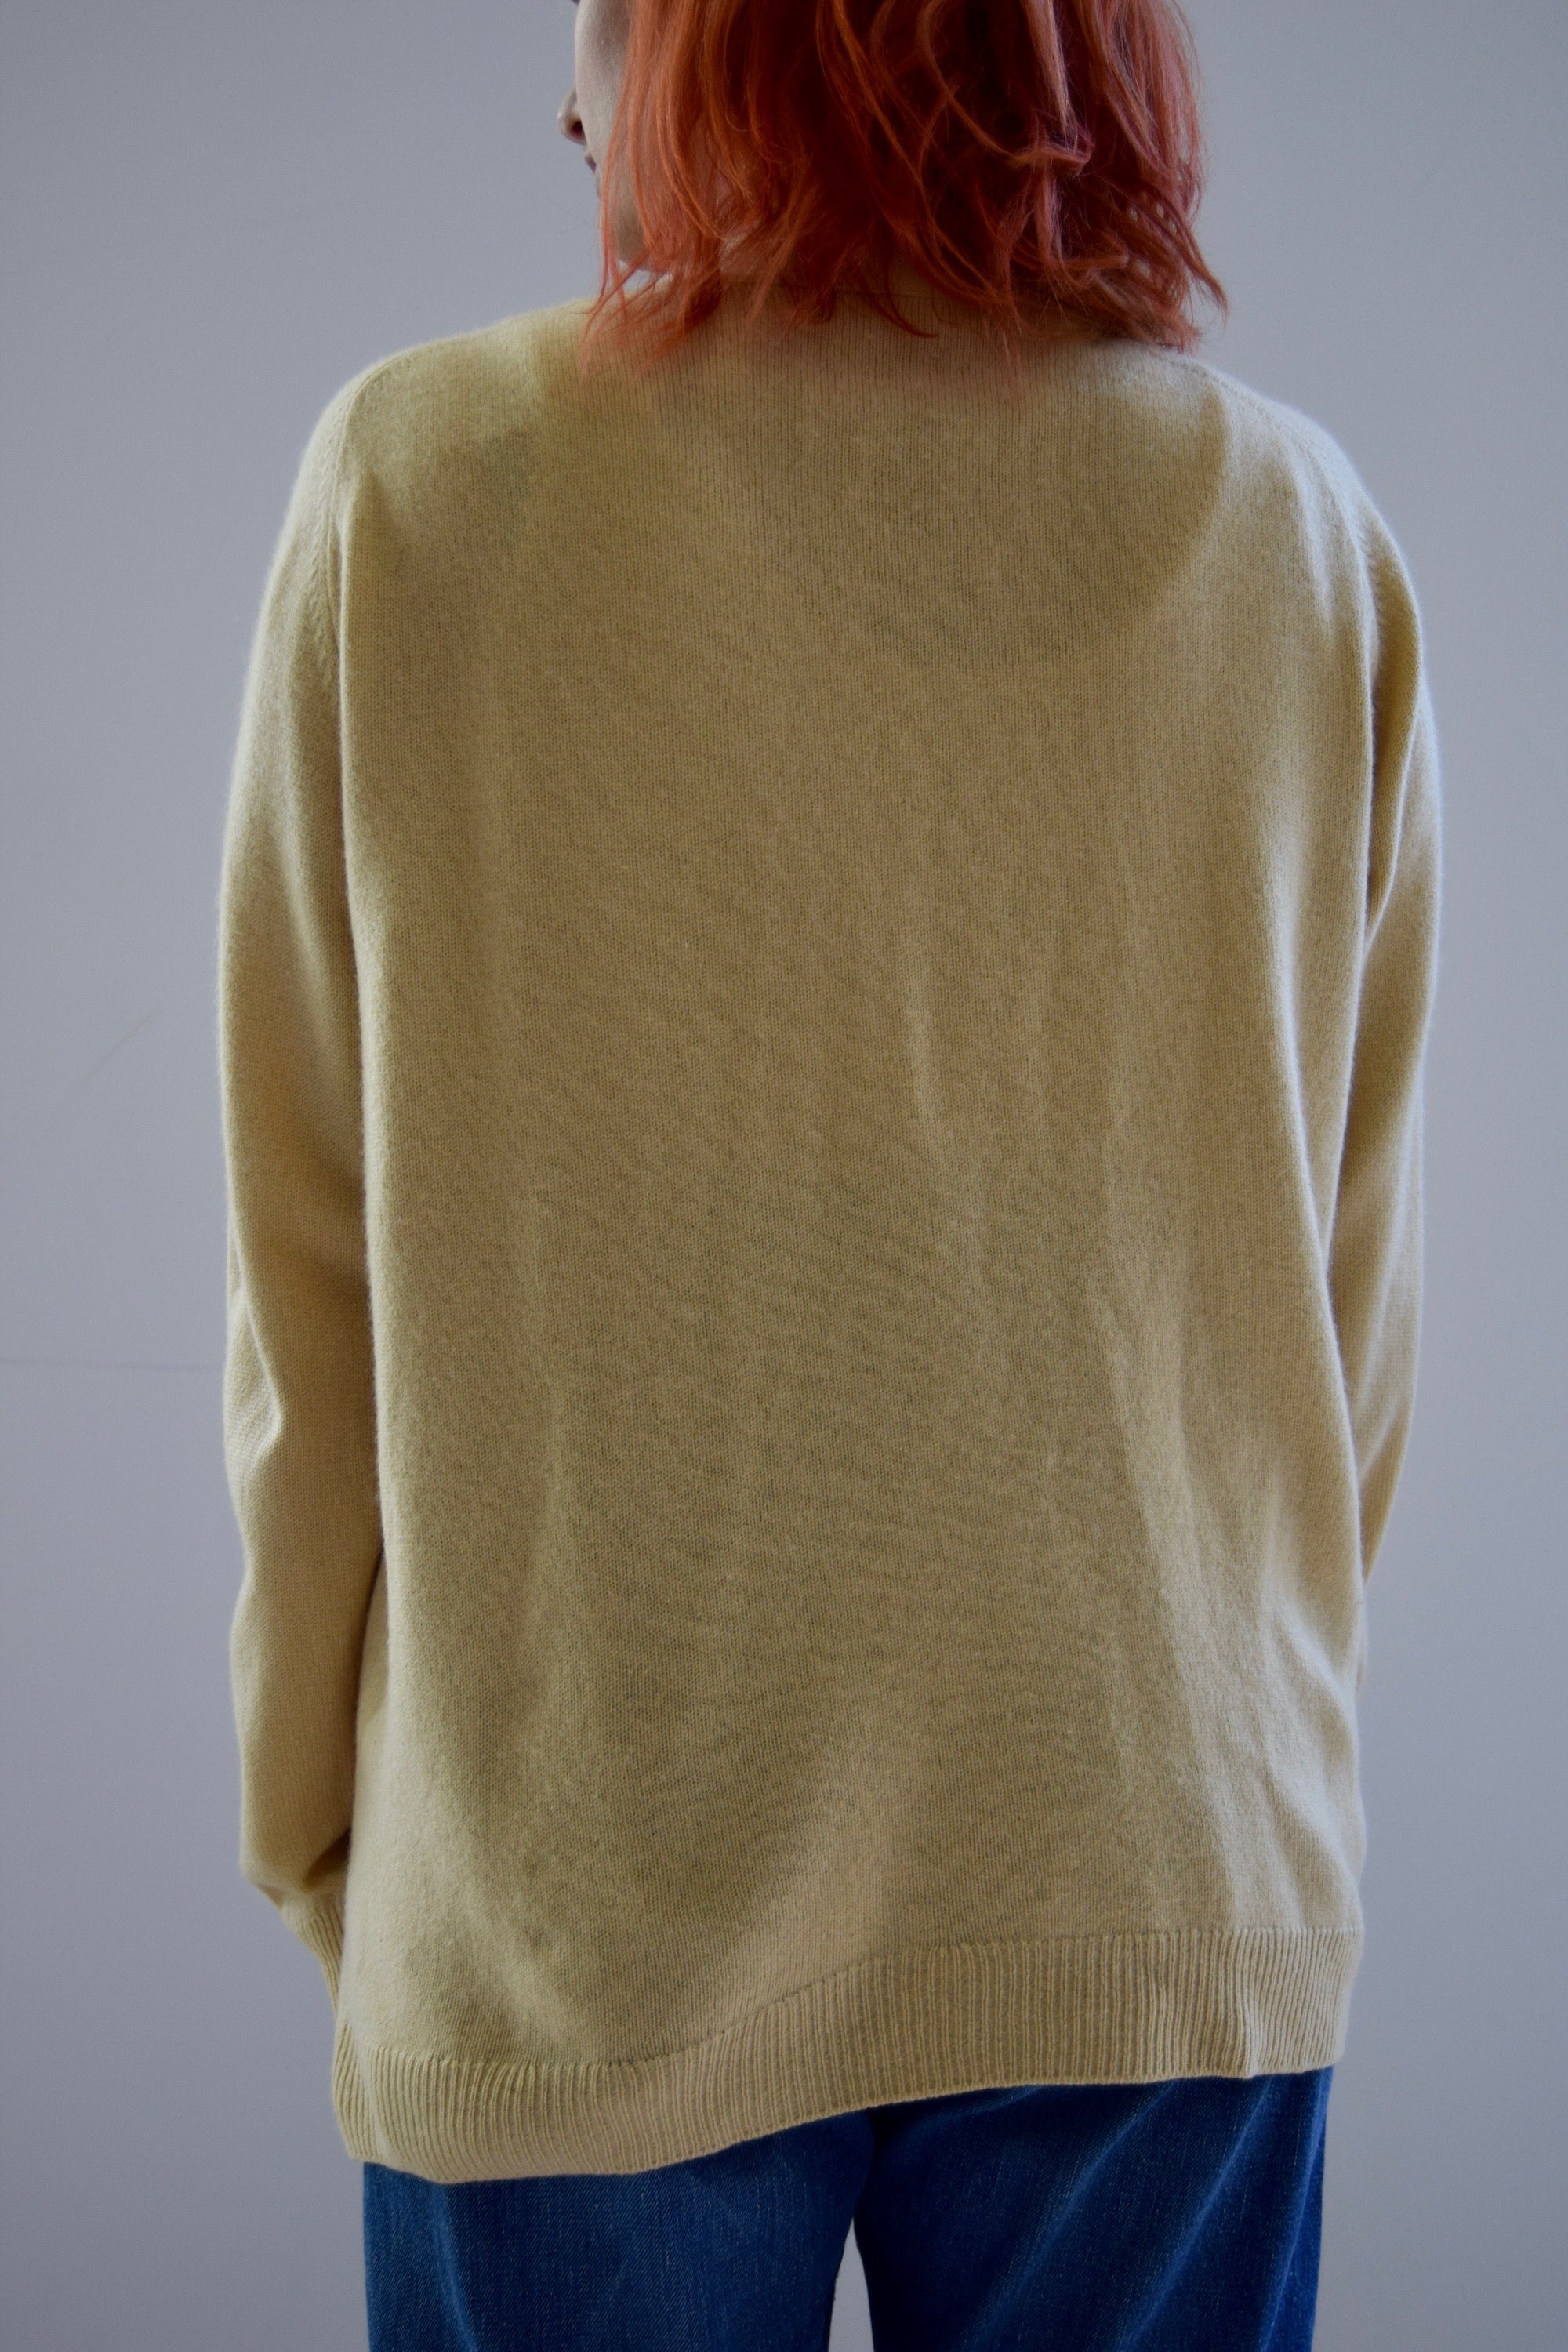 Butter Cashmere By "Pringle" Cardigan Sweater